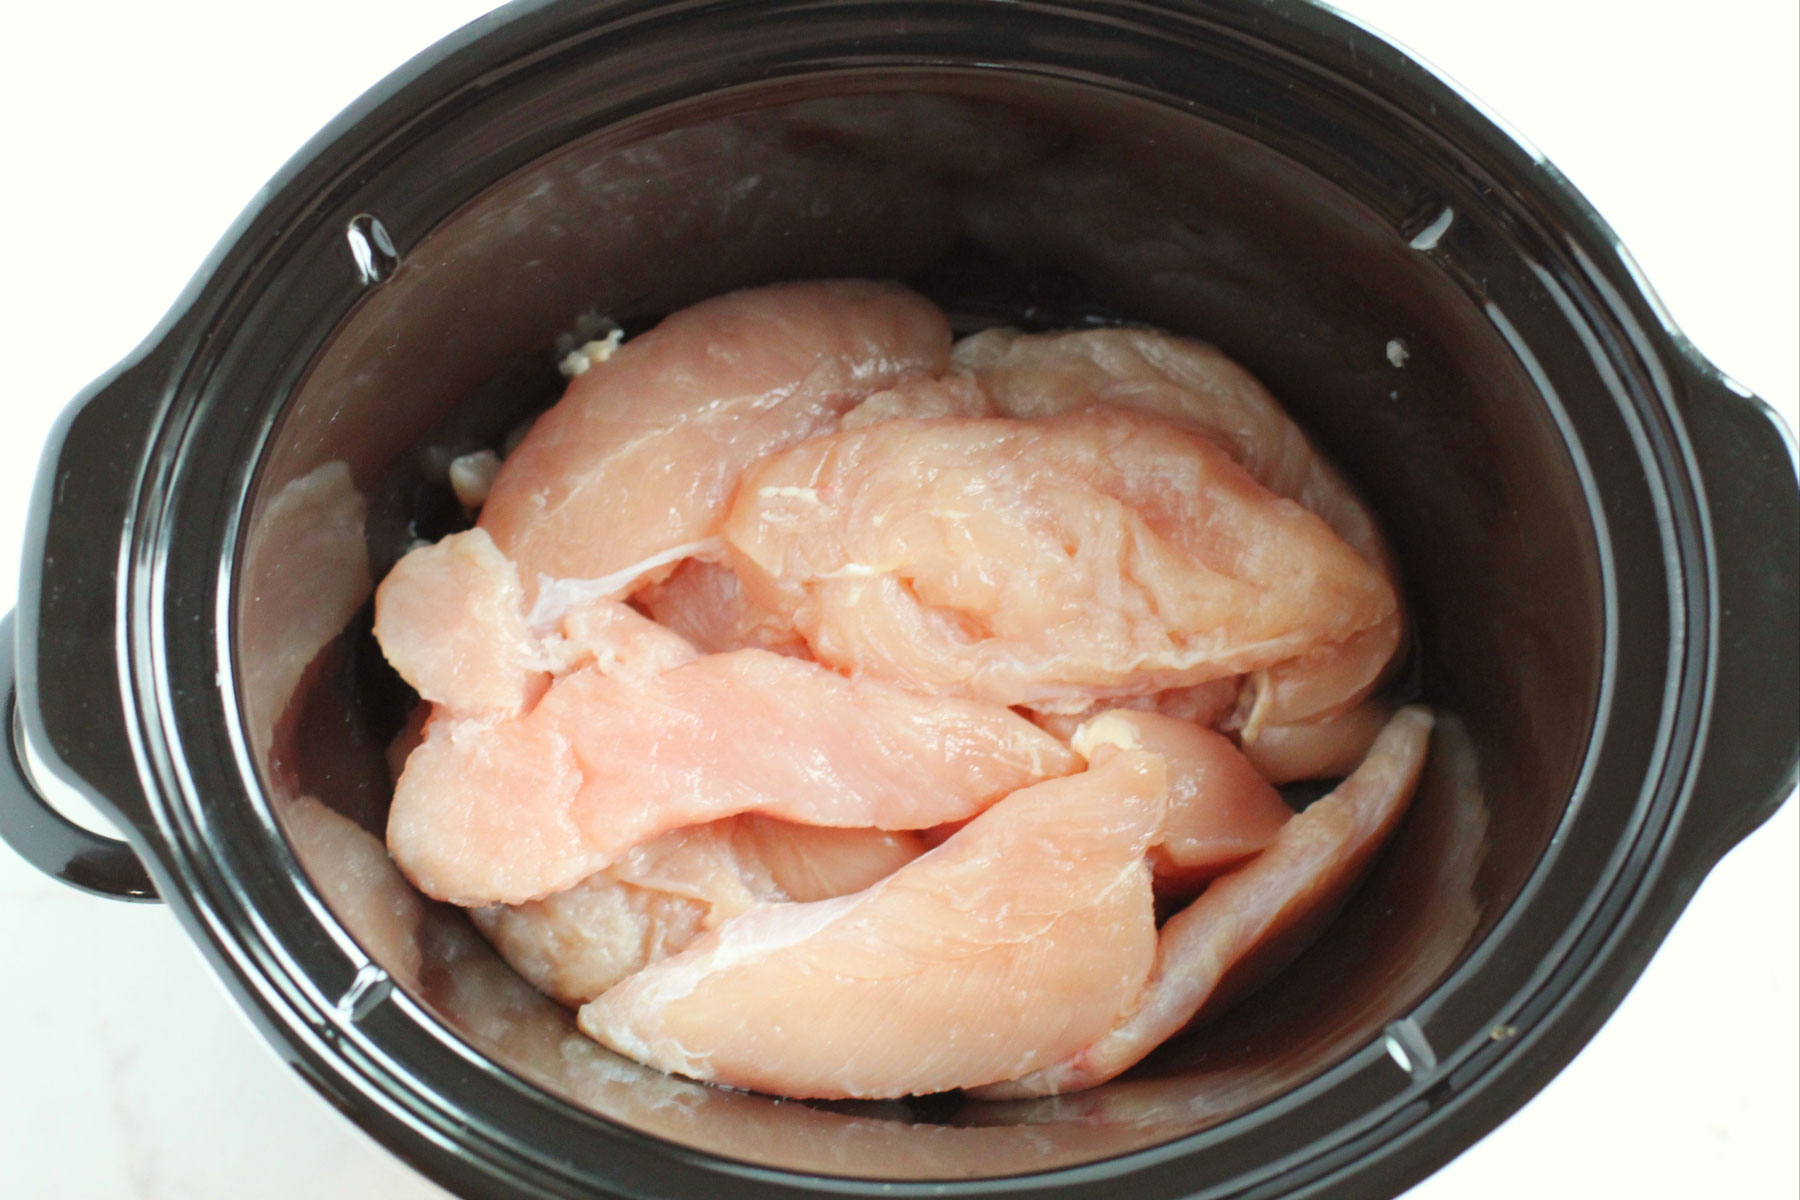 Slow Cooker Chicken Teriyaki process. The chicken was added to a bowl.